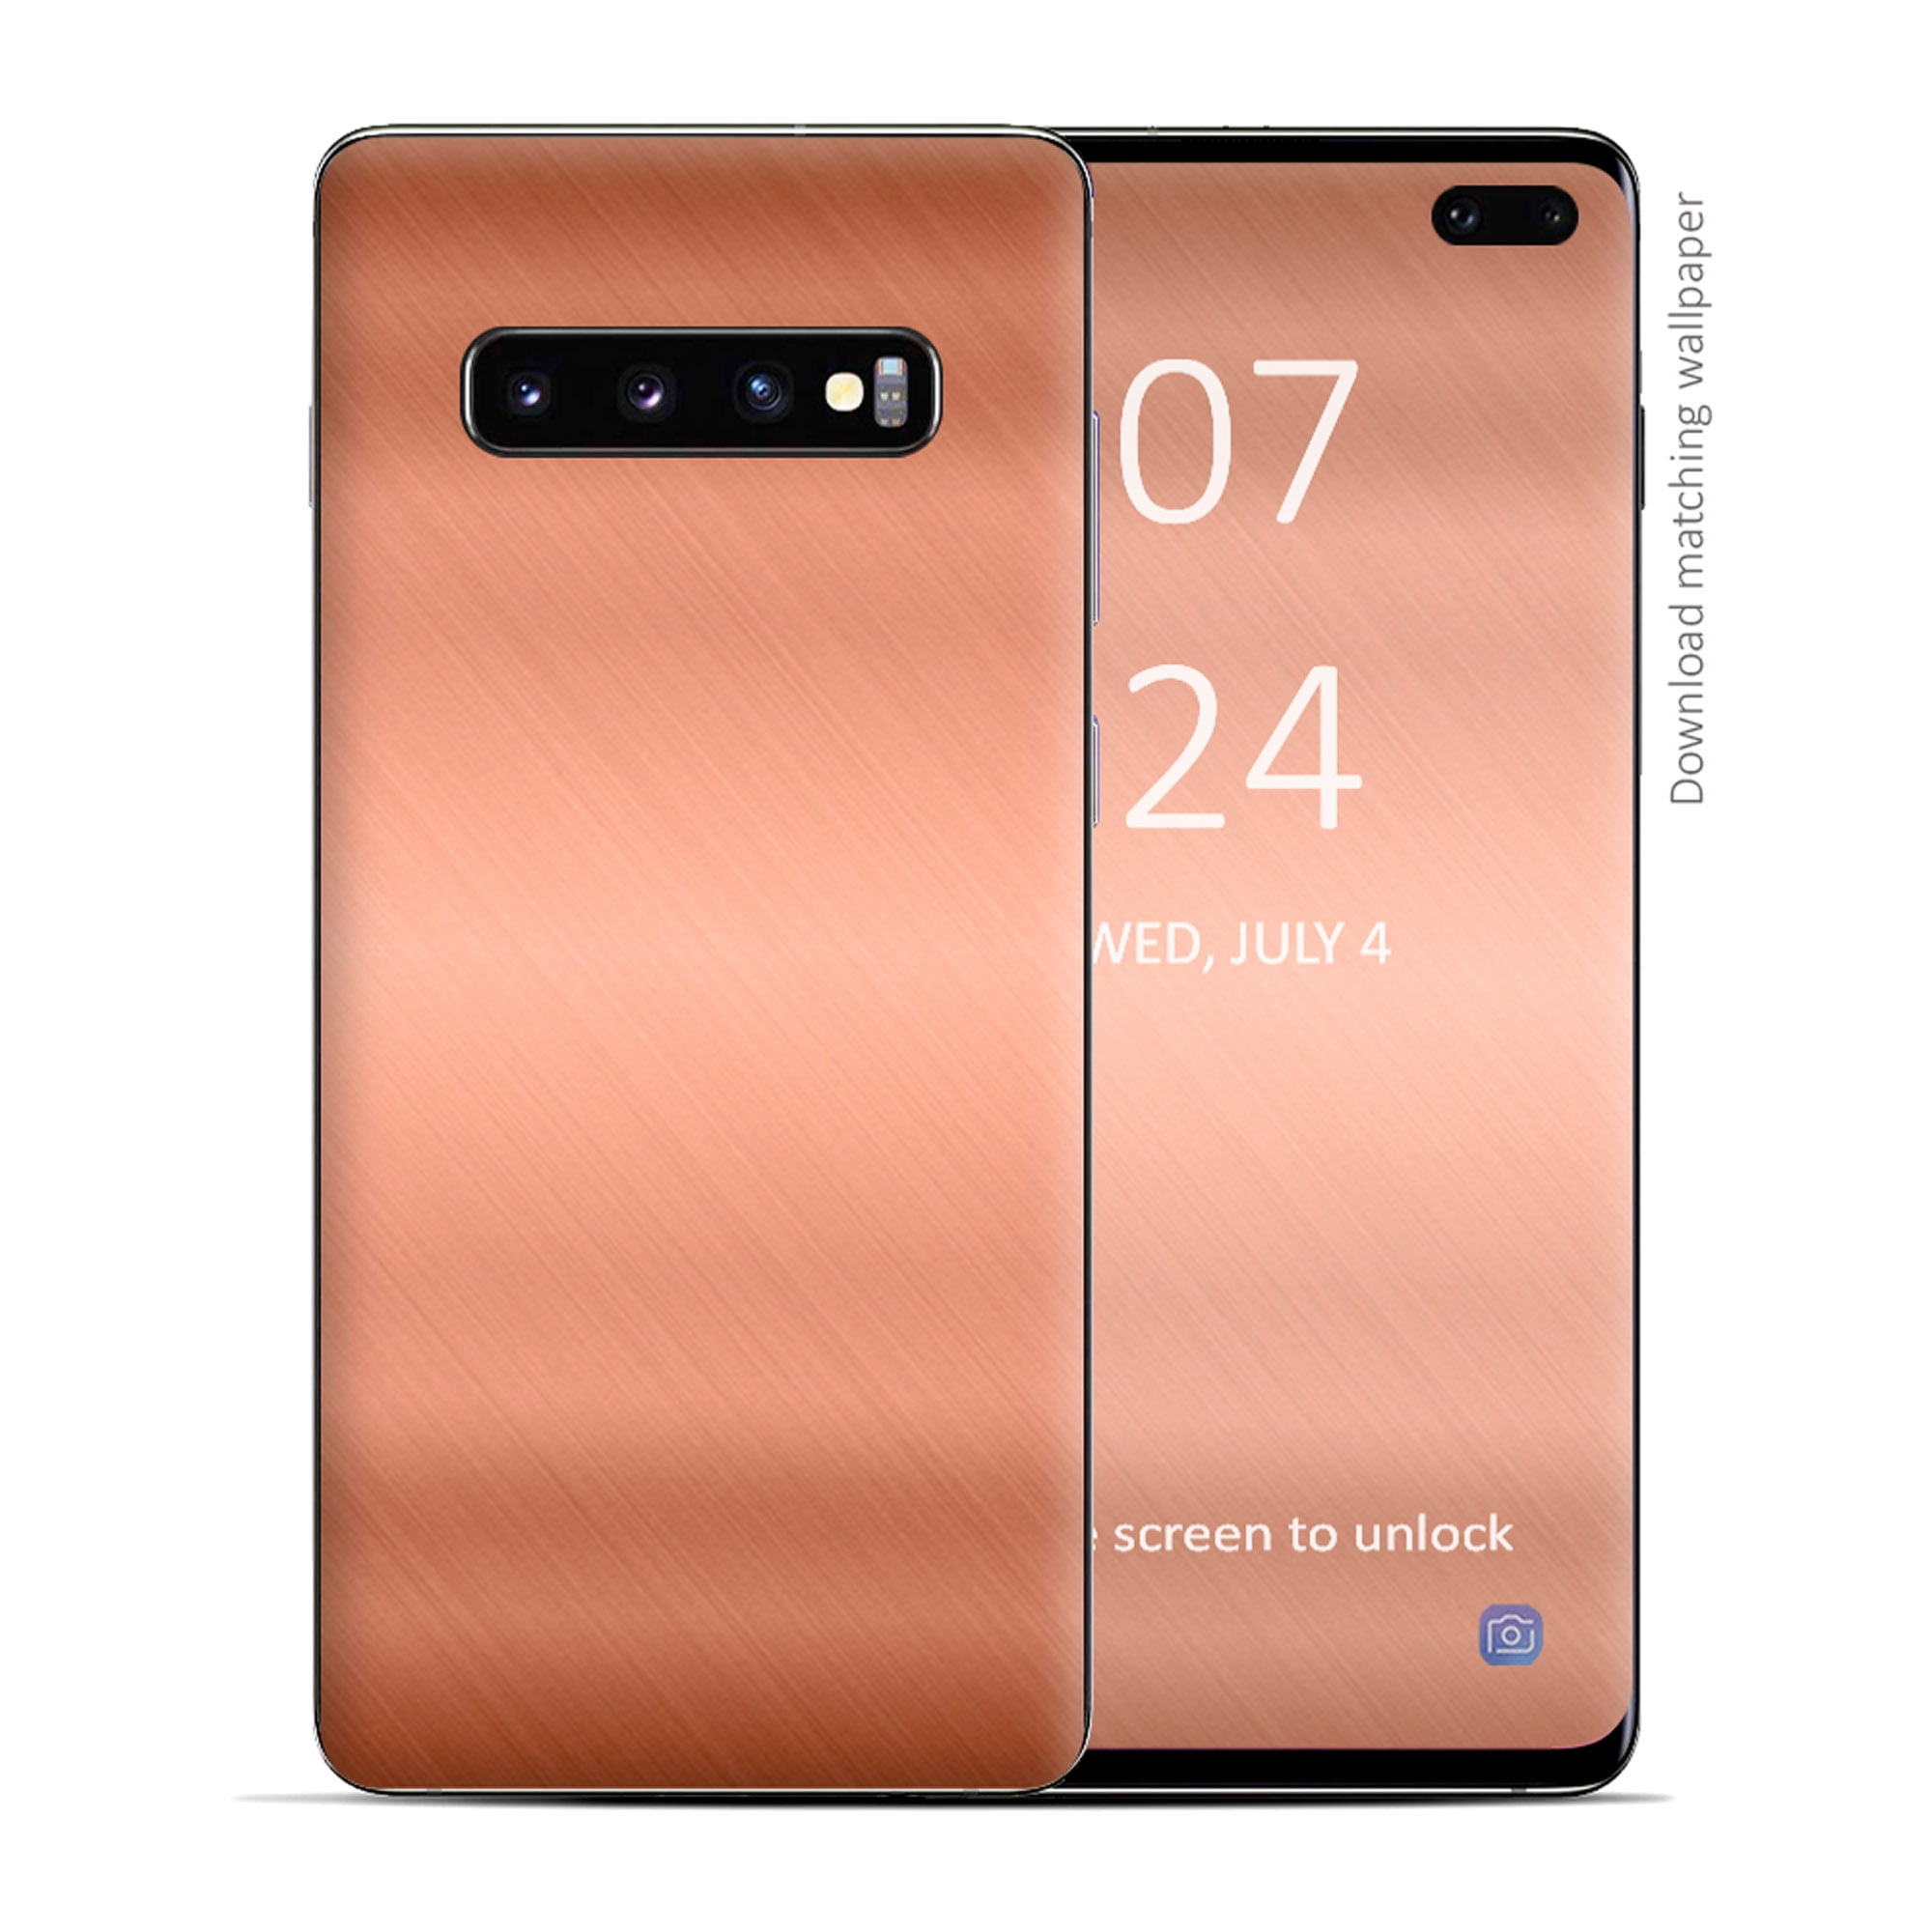 exegese Jurassic Park wasmiddel Skin Decal Vinyl Wrap for Samsung Galaxy S10 Plus - decal stickers skins  cover - Copper Panel - Walmart.com